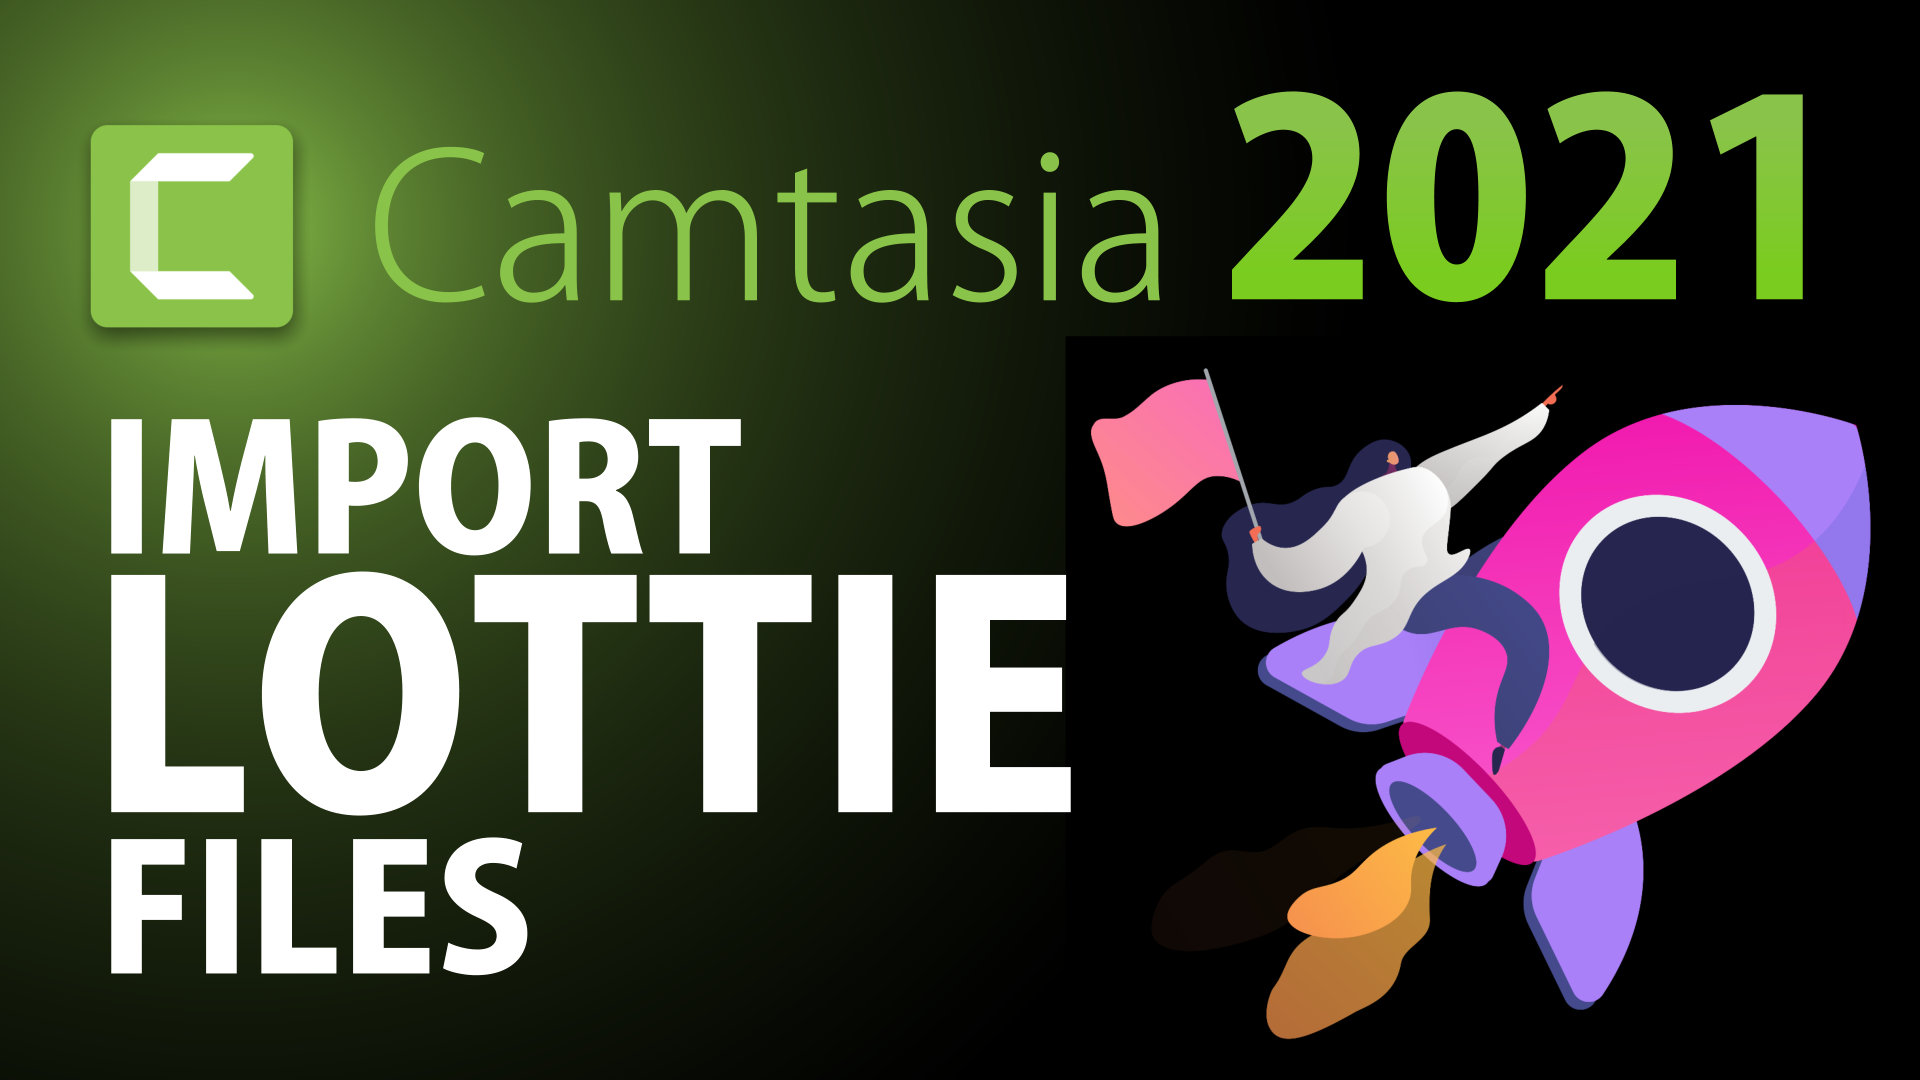 LOTTIE JSON animation files are now supported in Camtasia 2021